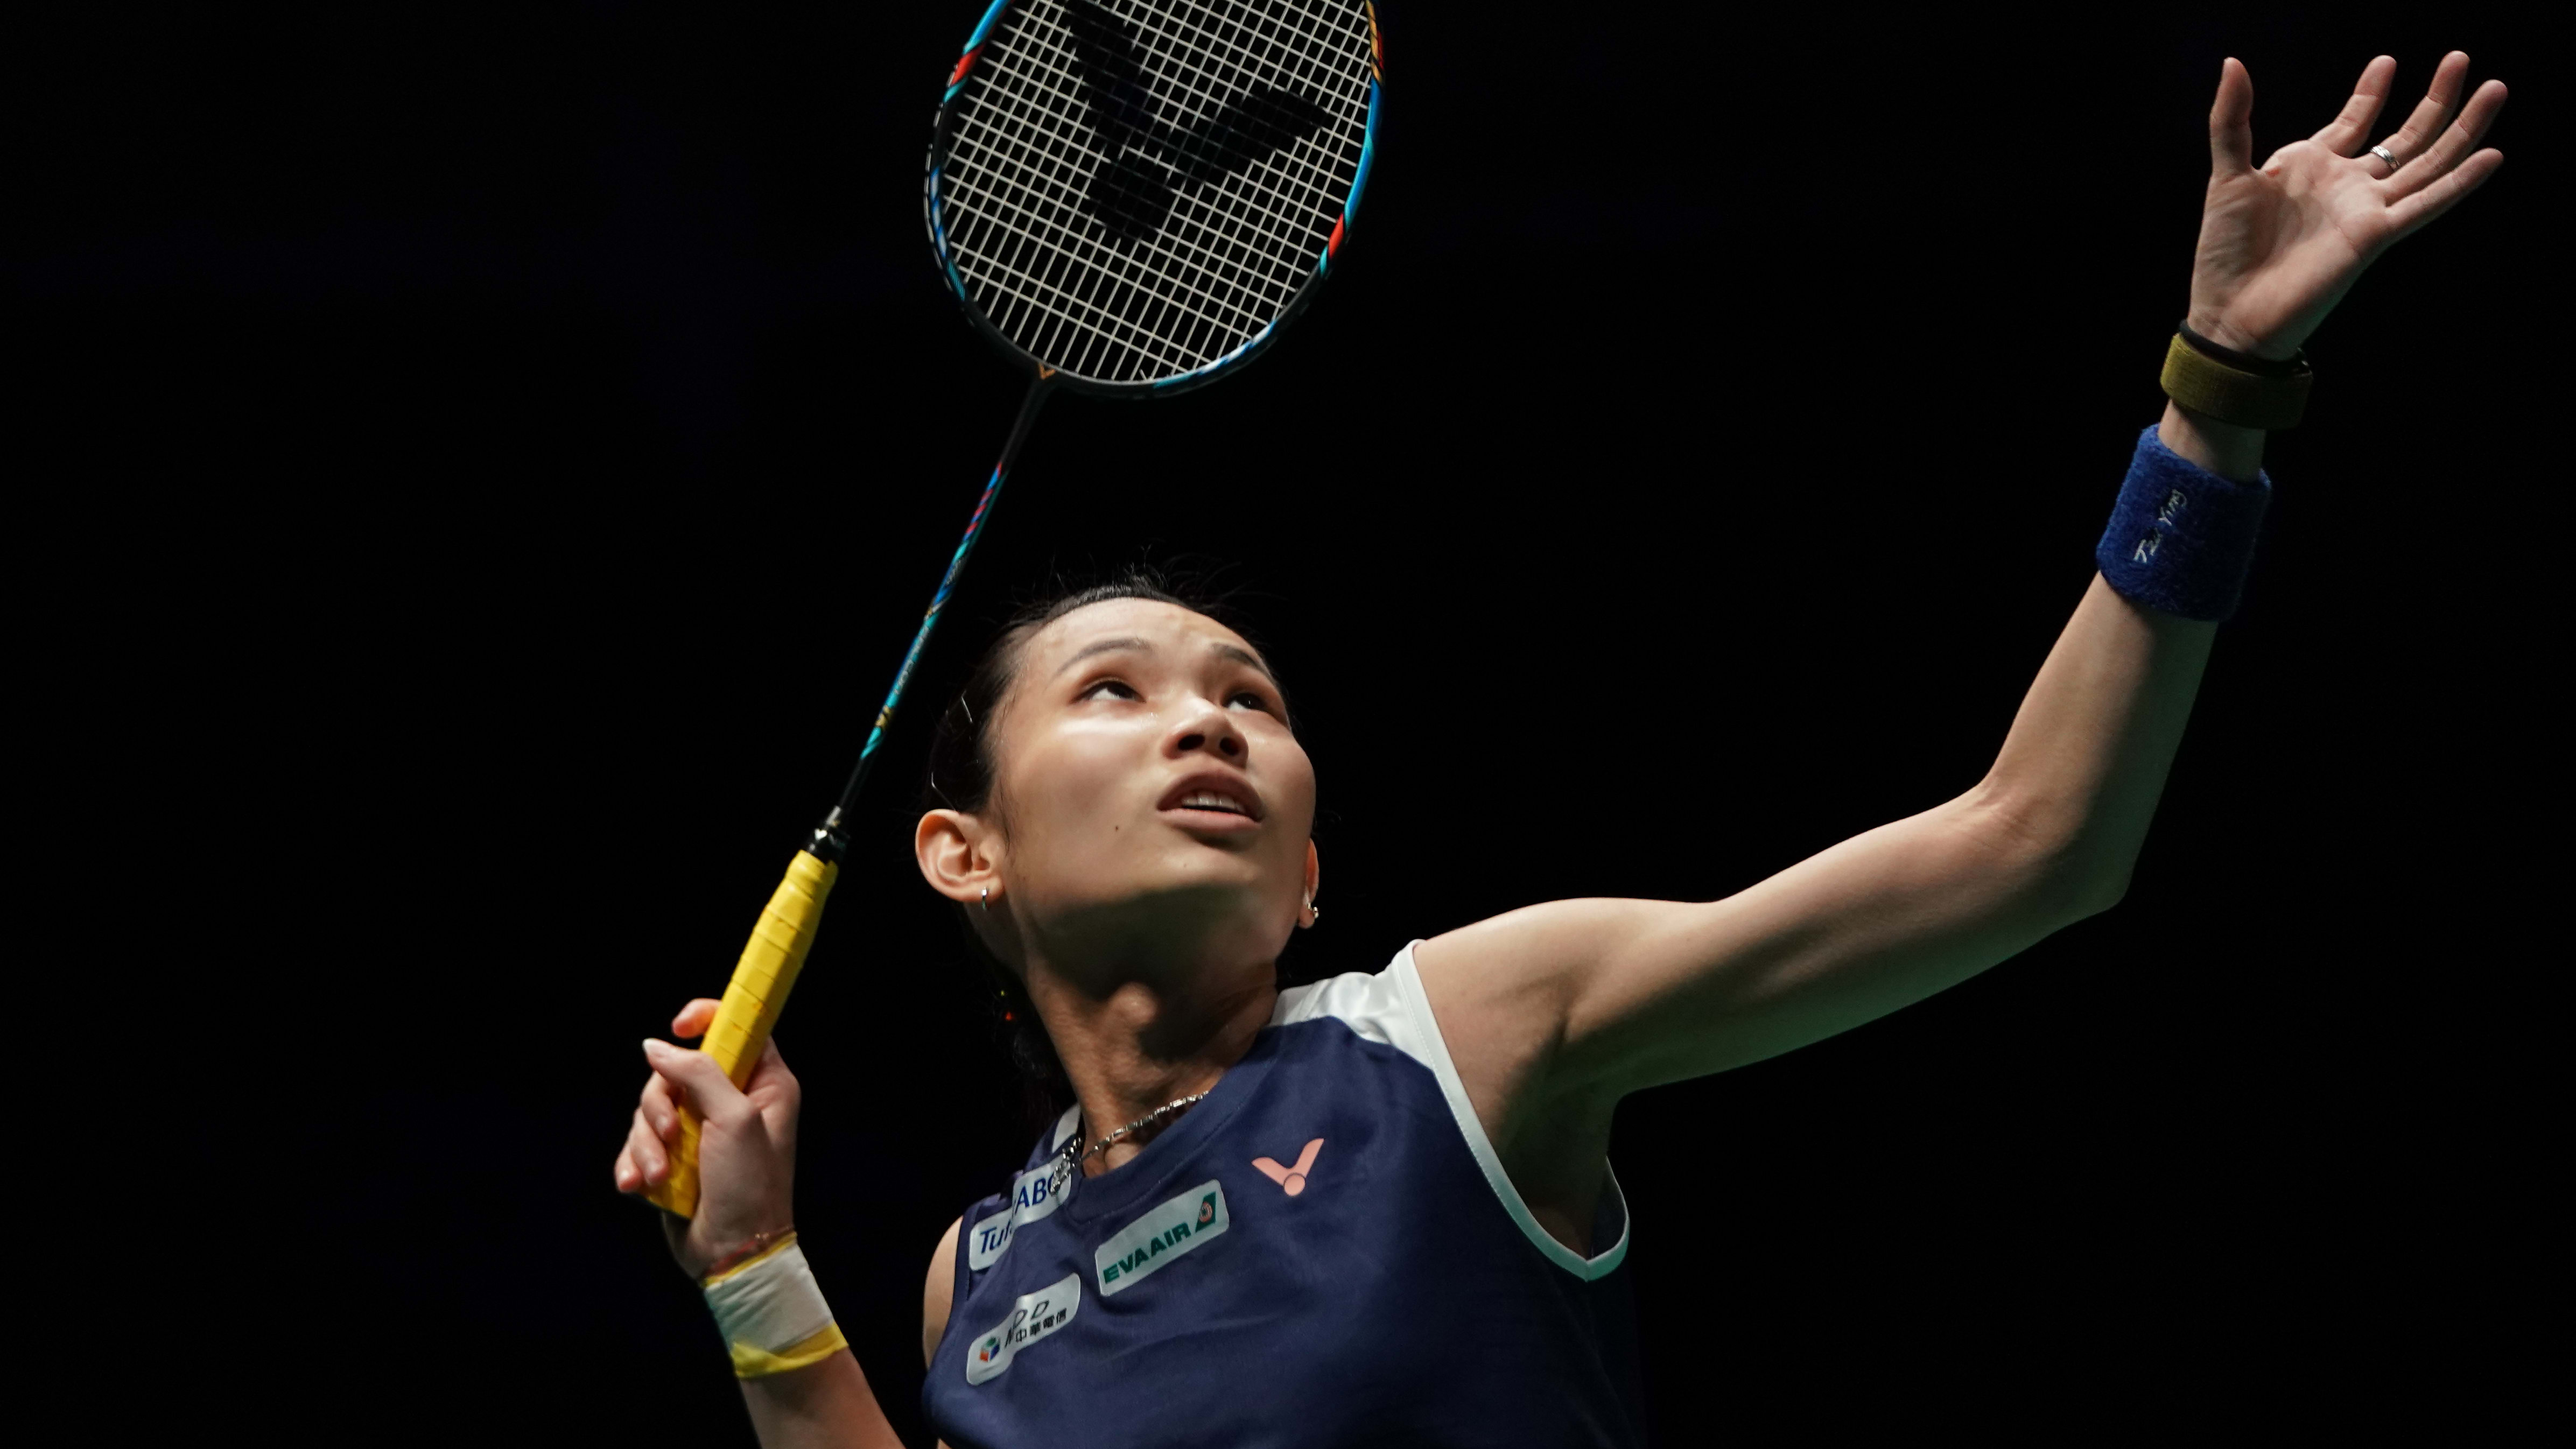 Indonesia Open 2019 Live Streaming and preview on Olympic Channel